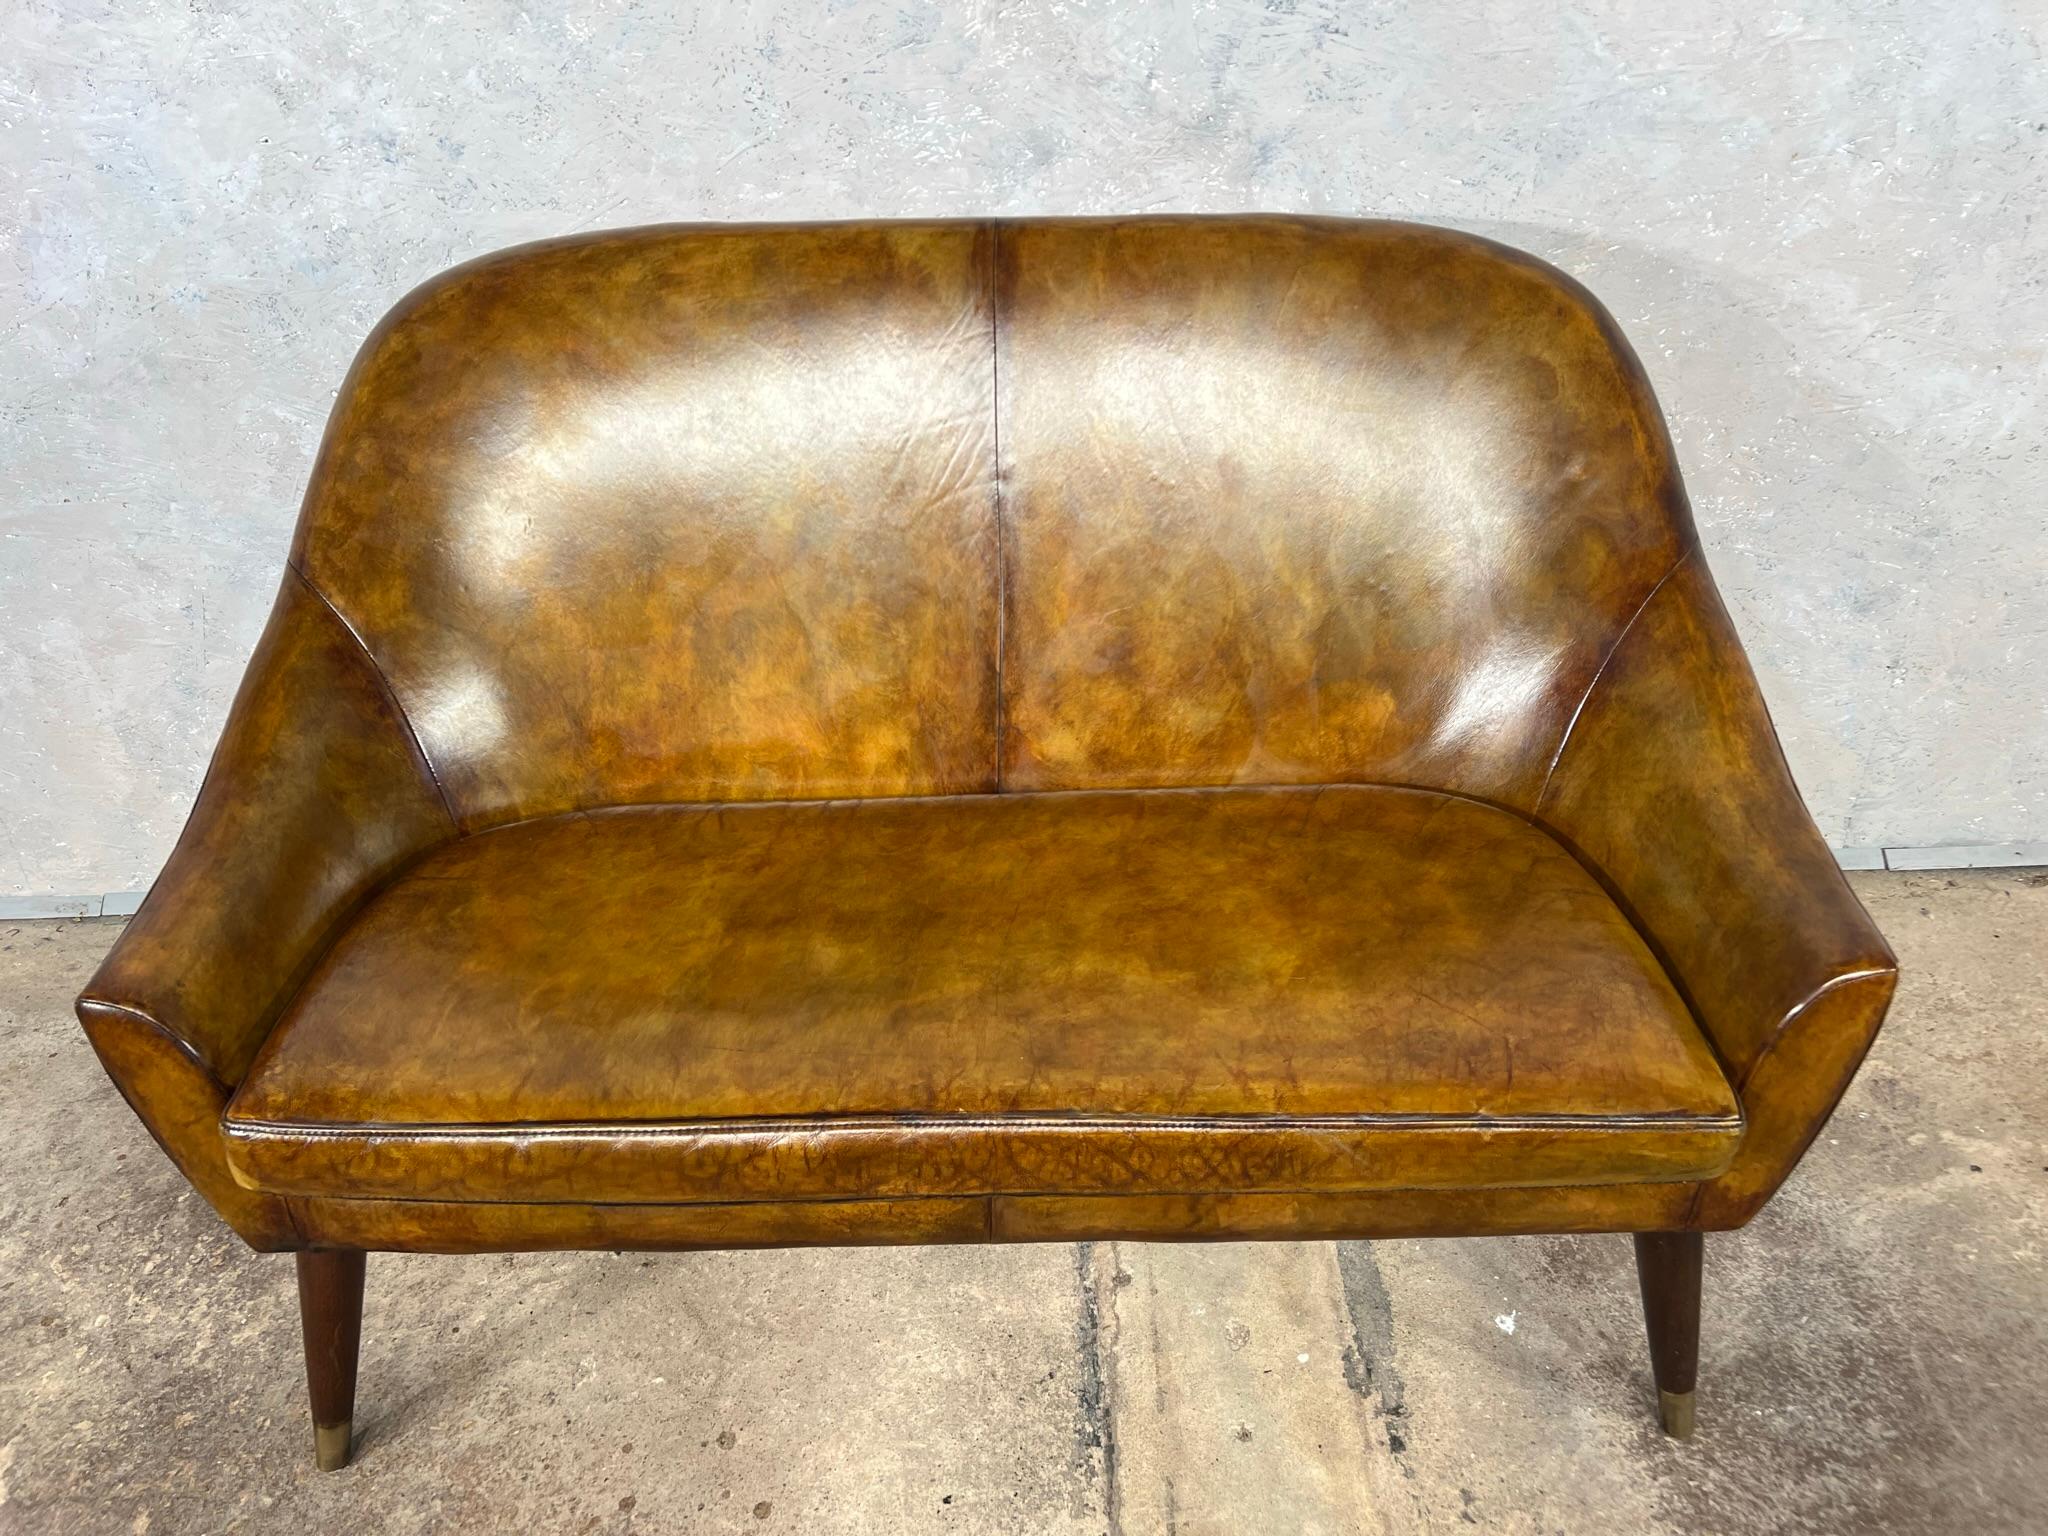 A very stylish vintage style sofa with a wonderful patinated light tan colour. Great design sits beautifully. Neat in size. Solid Mahogany legs with brass caps.
Viewings welcome at our showroom in Lewes, East Sussex.

Delivery to mainland UK